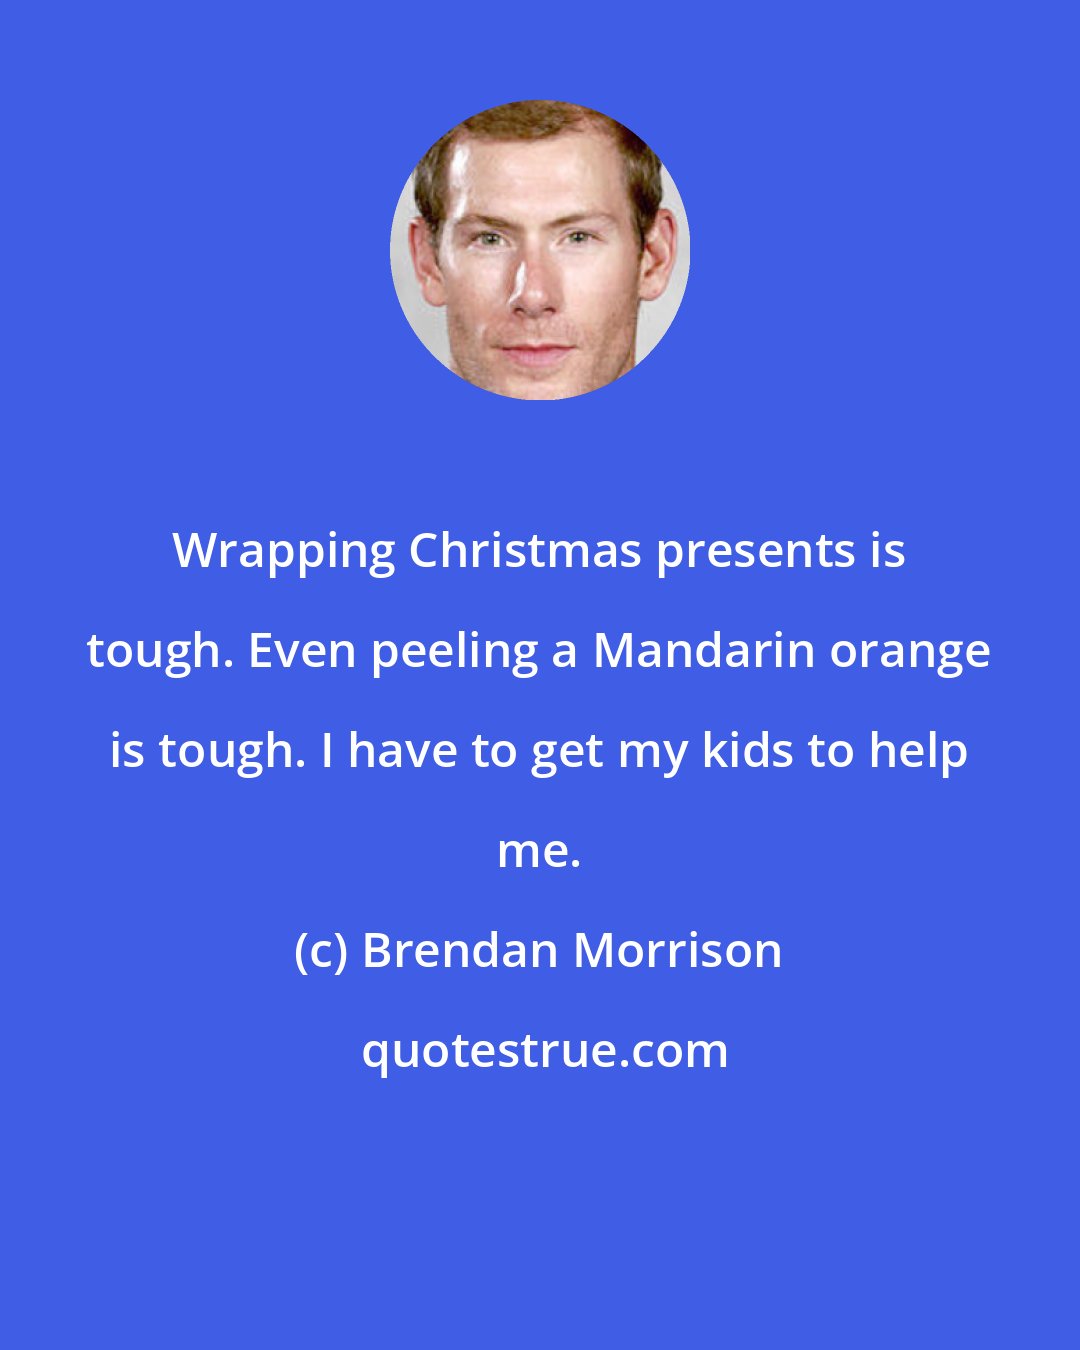 Brendan Morrison: Wrapping Christmas presents is tough. Even peeling a Mandarin orange is tough. I have to get my kids to help me.